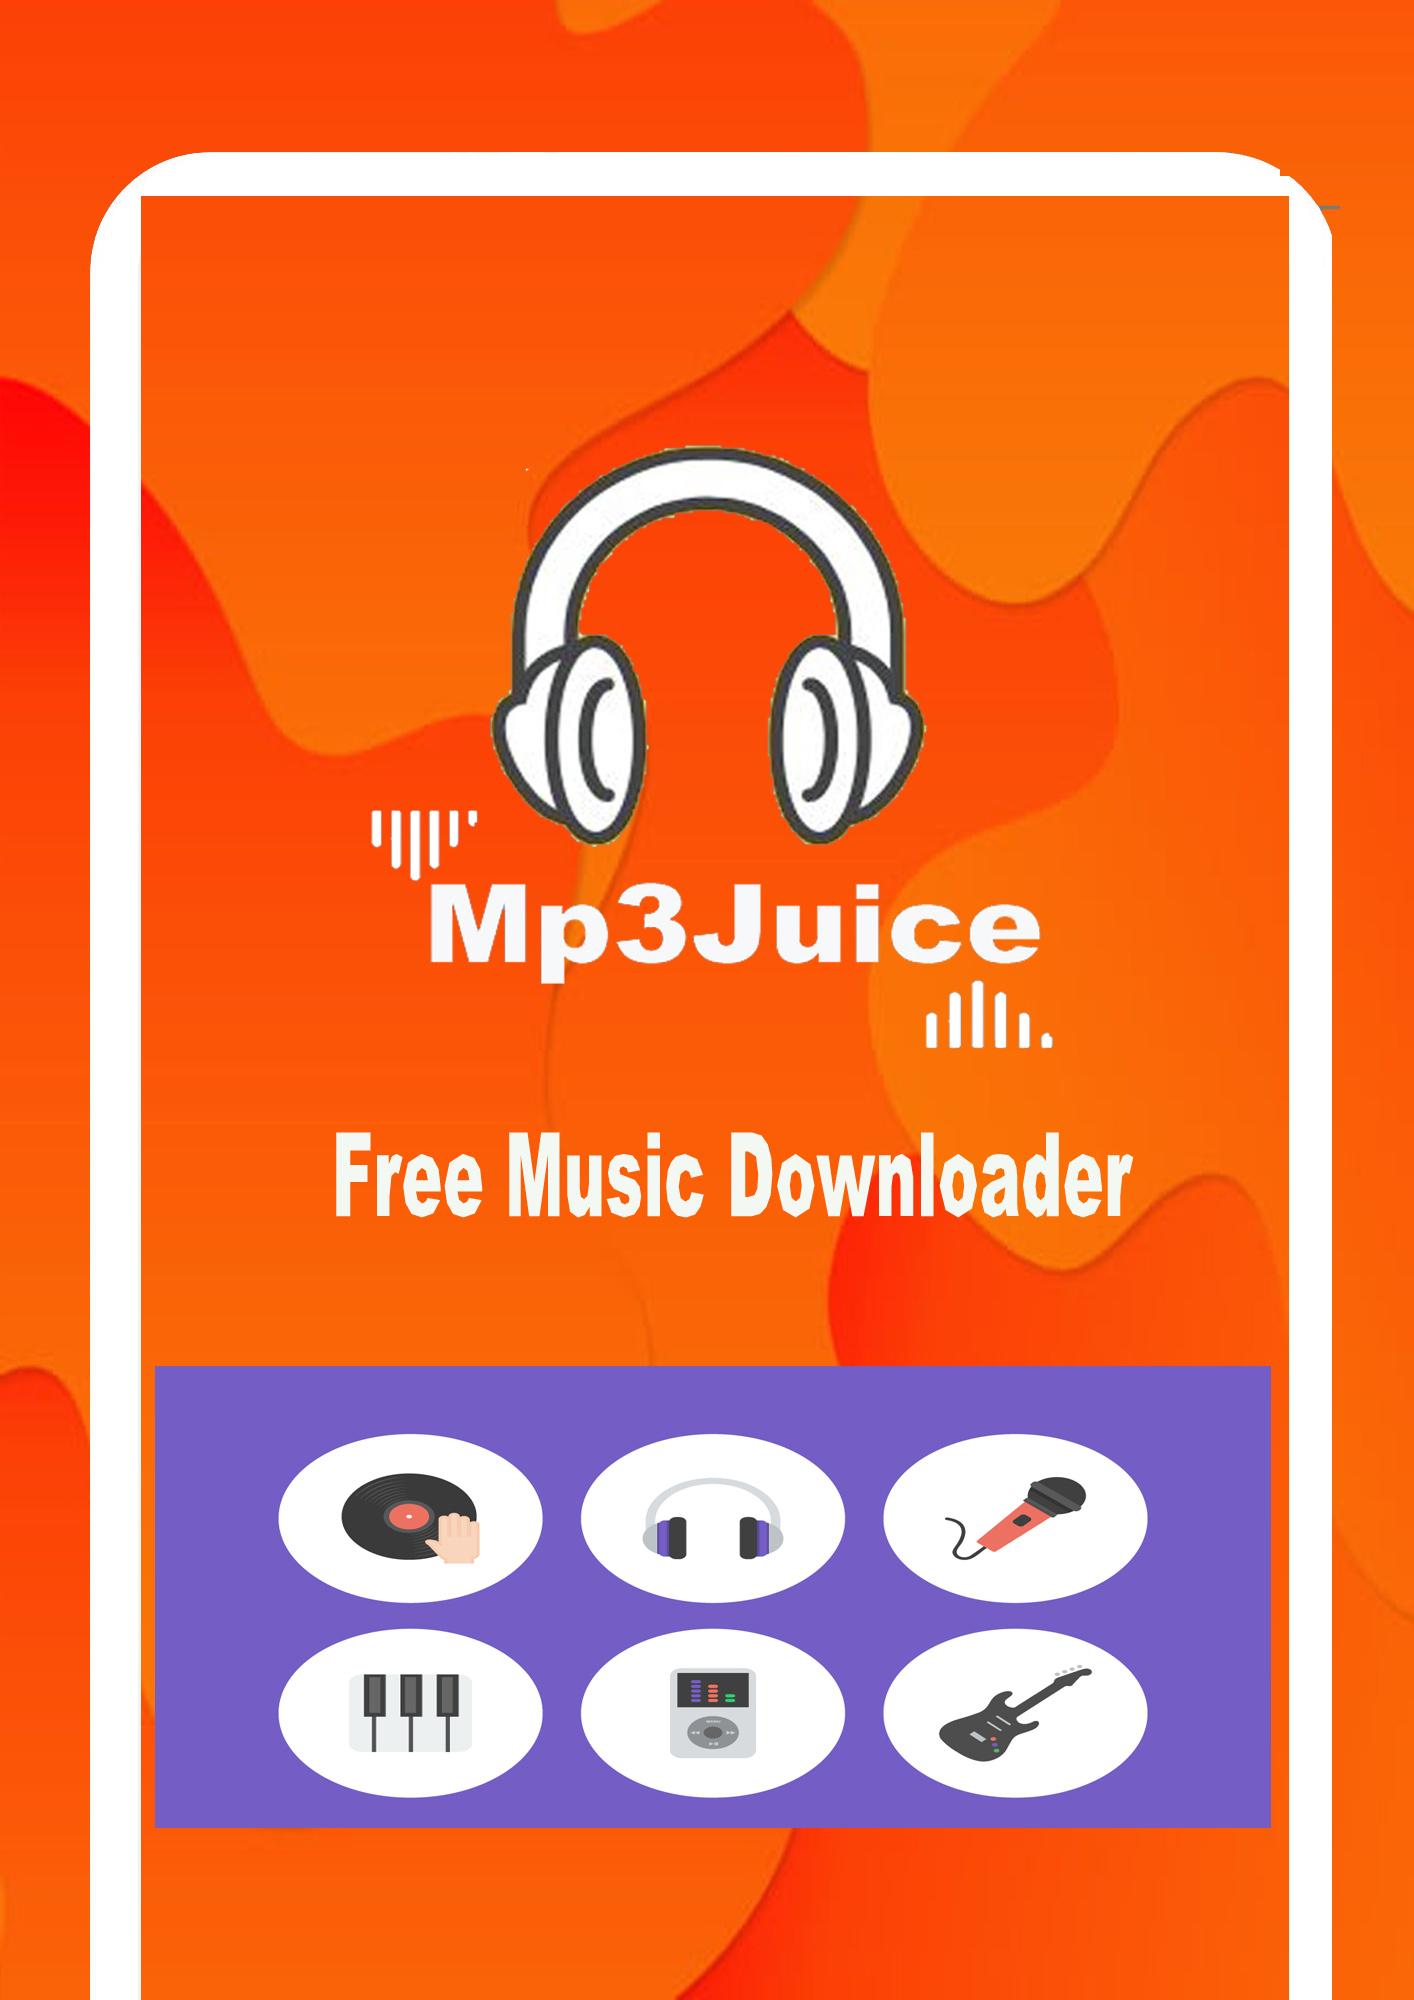 Mp3 Juice - Free Juices Music Downloader 2021 for Android - APK Download